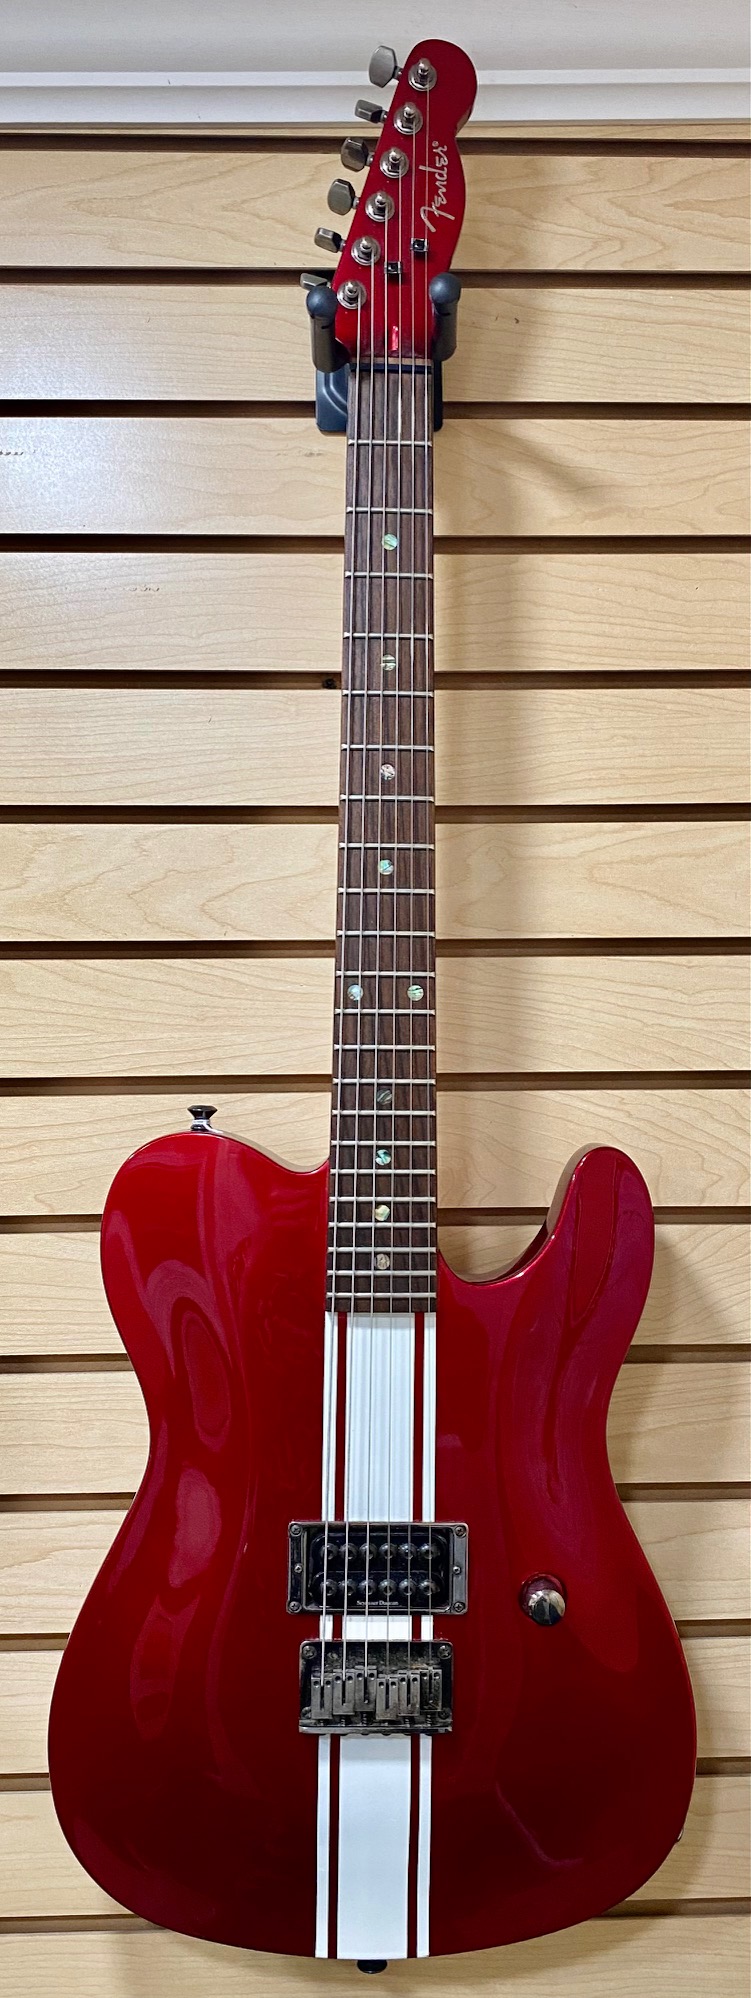 Fender Esquire Telecaster GT Electric Guitar - Candy Apple Red ...